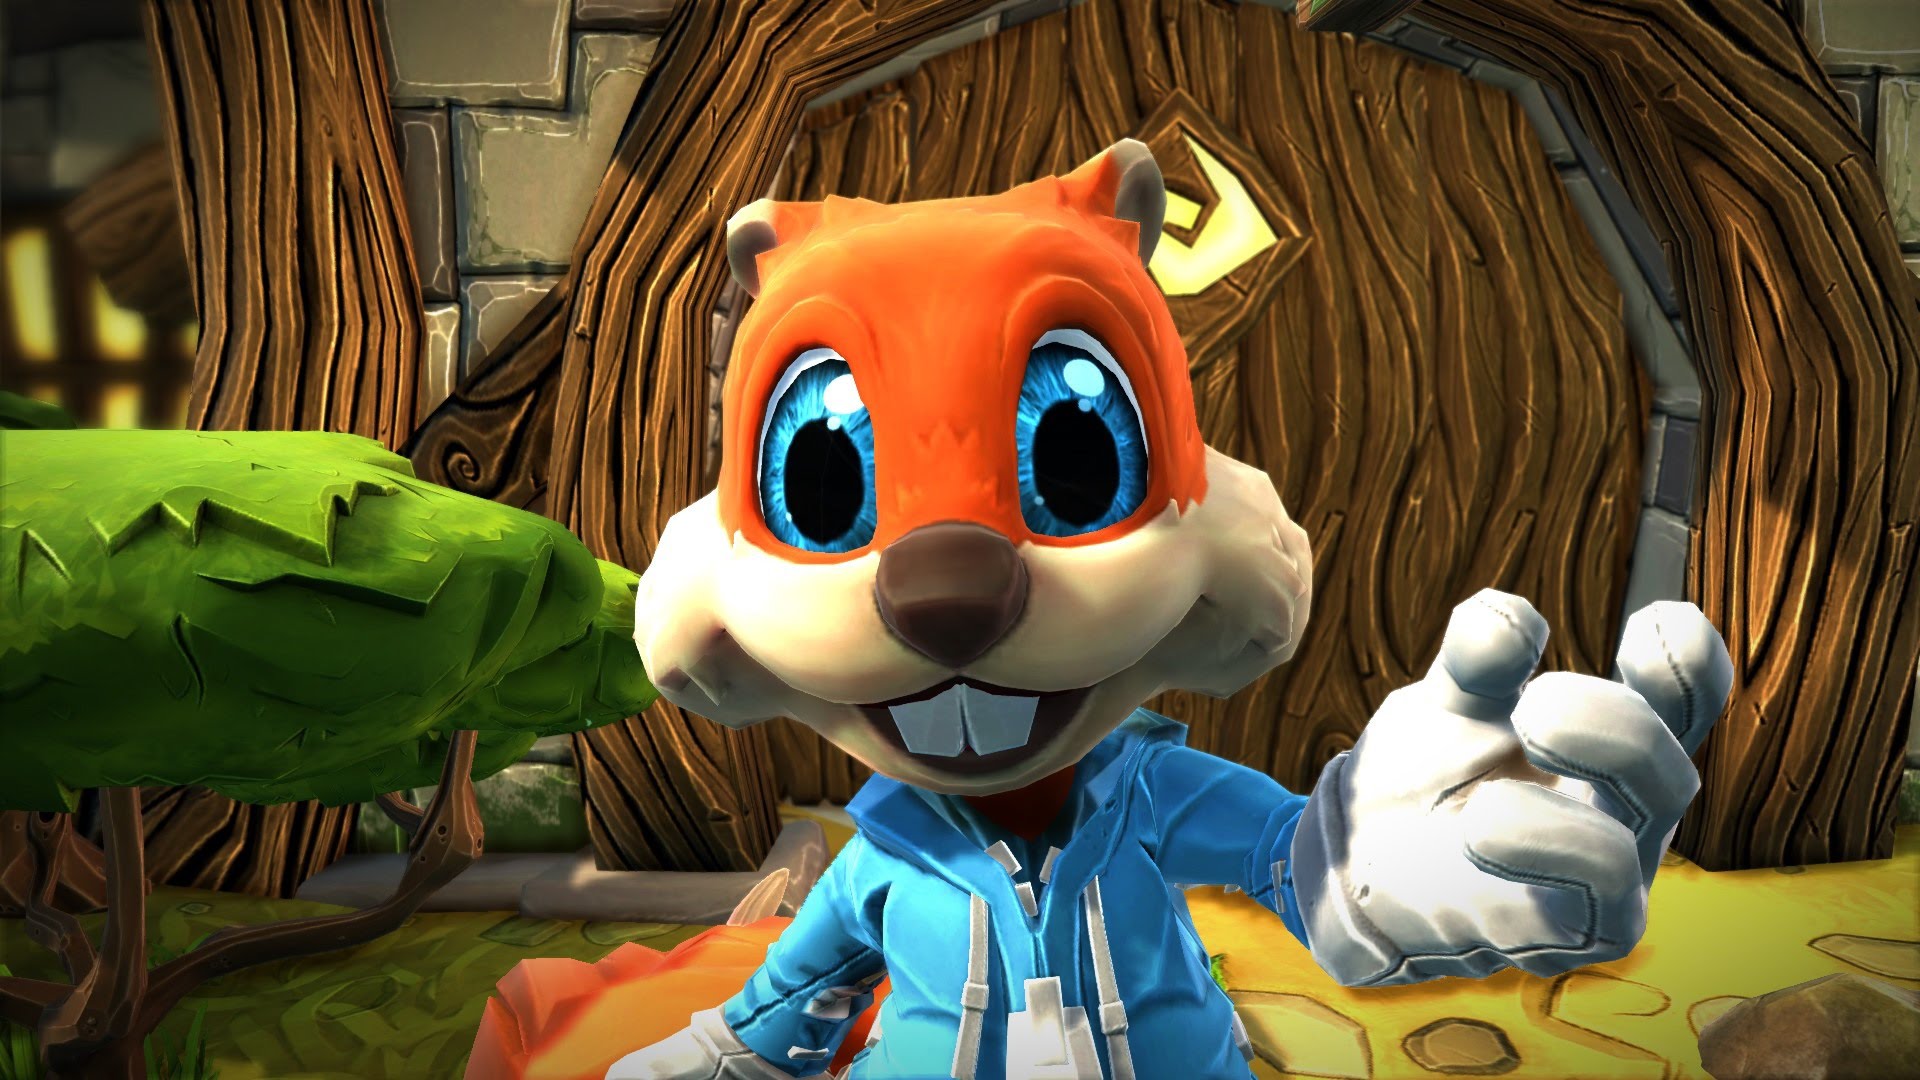 Project Spark Conker's Big Reunion